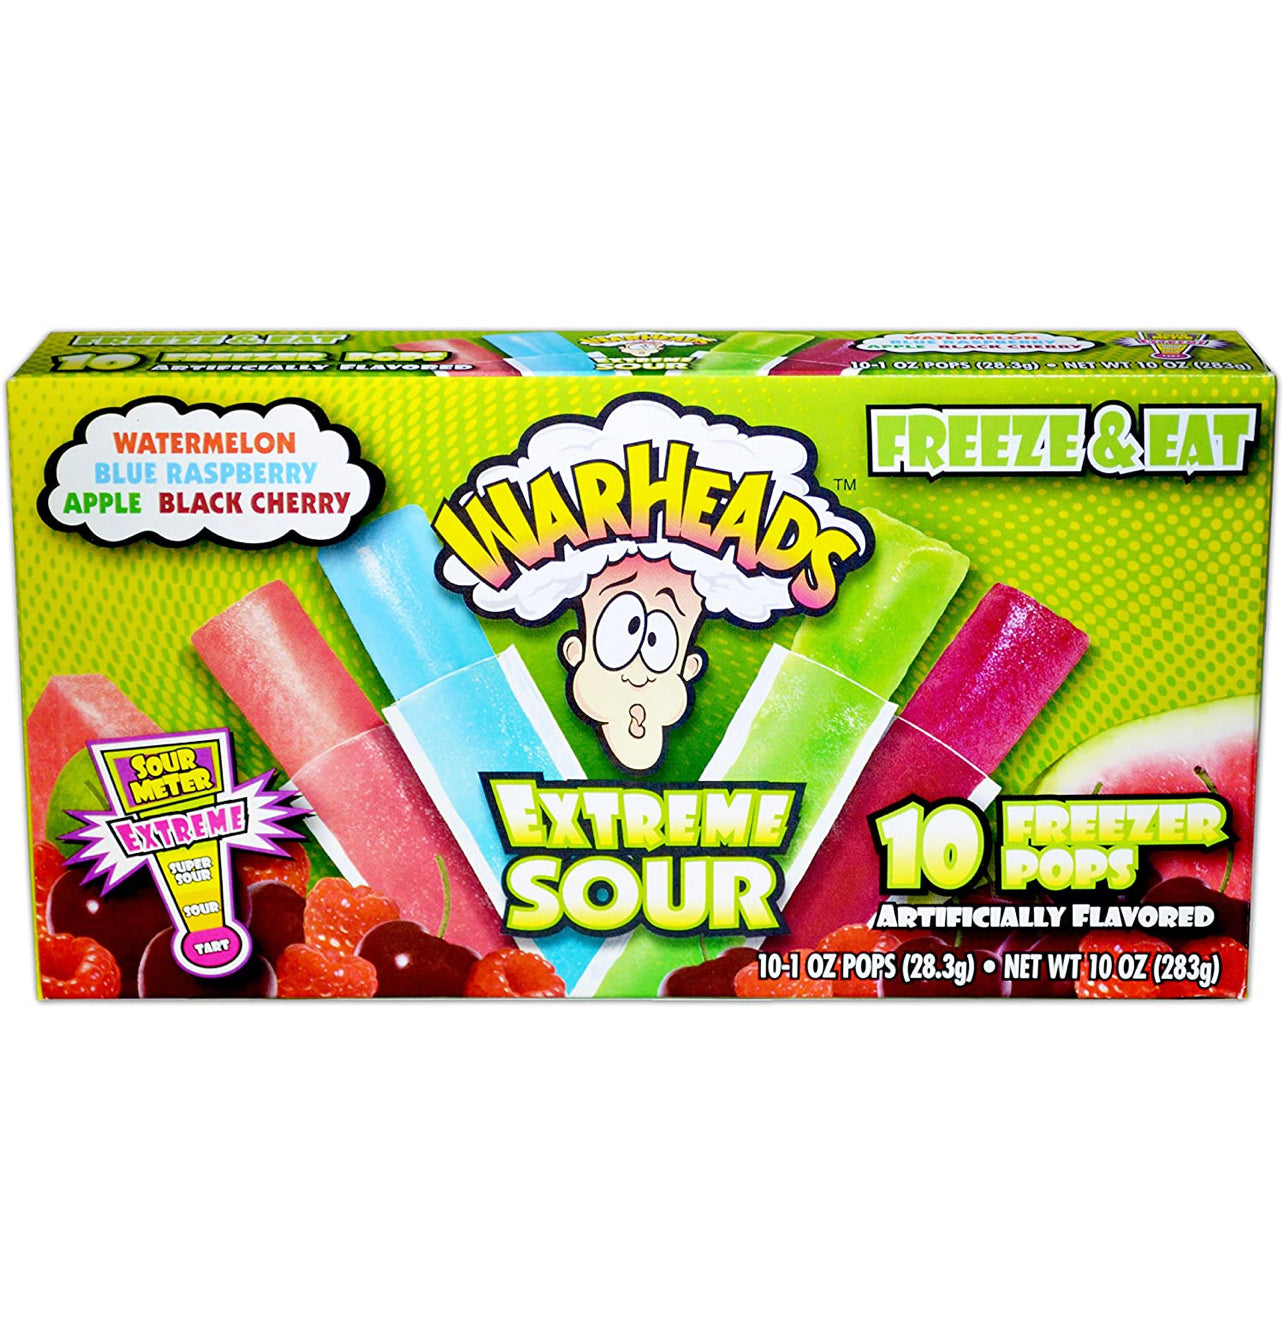 Warheads Extreme Sour Freeze Pops